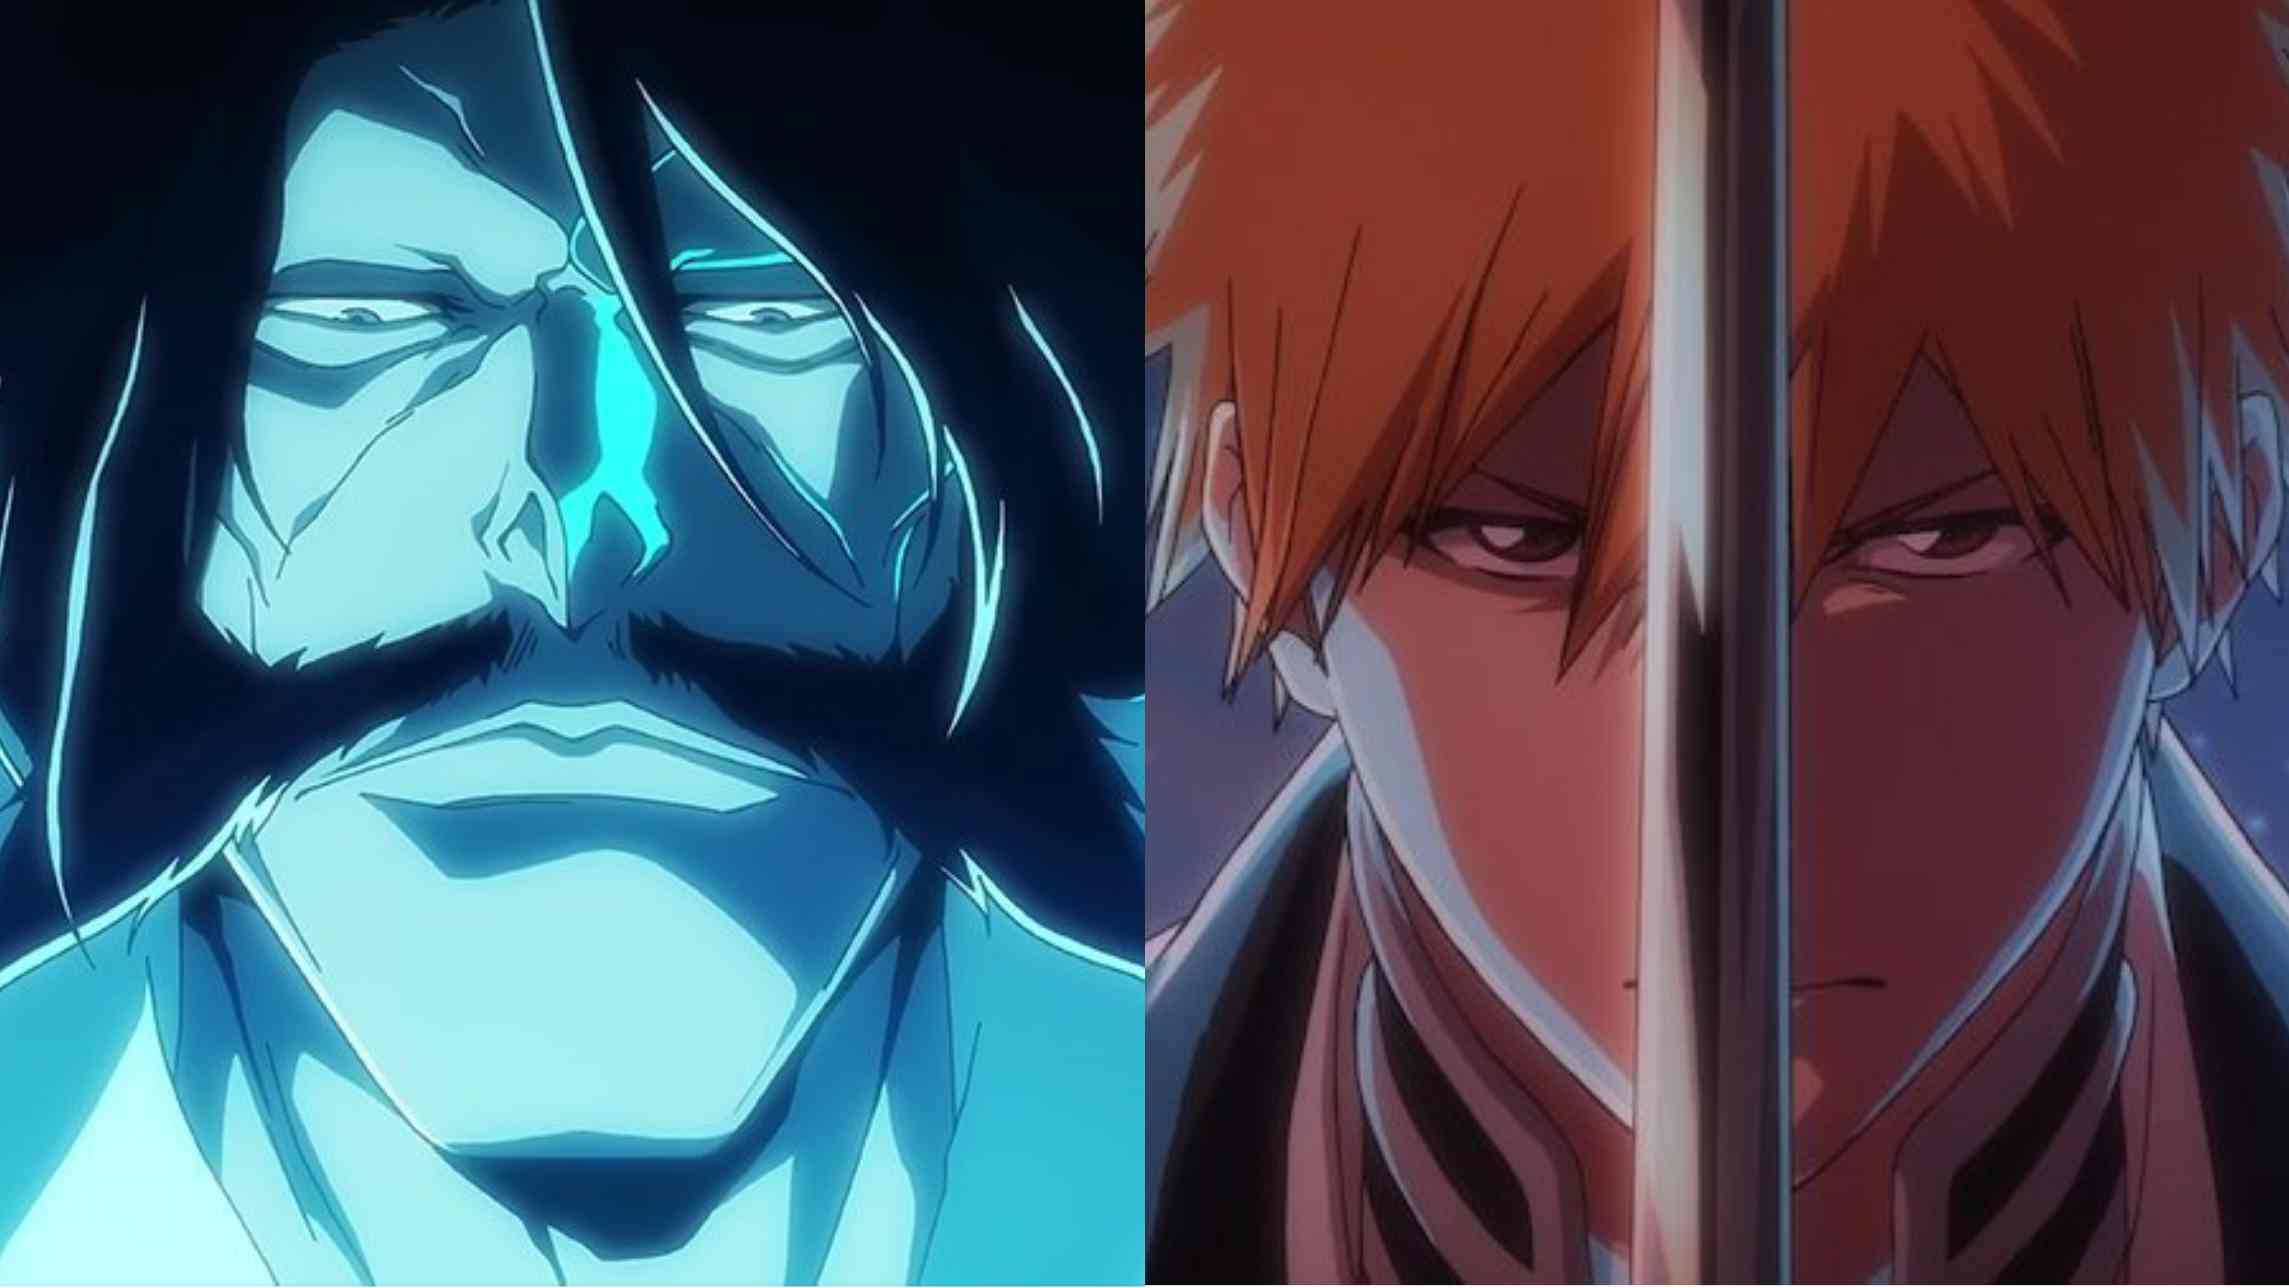 Bleach 'Thousand Year Blood War' Arc Episode 1 Release Date, Time, Preview,  & Where To Watch